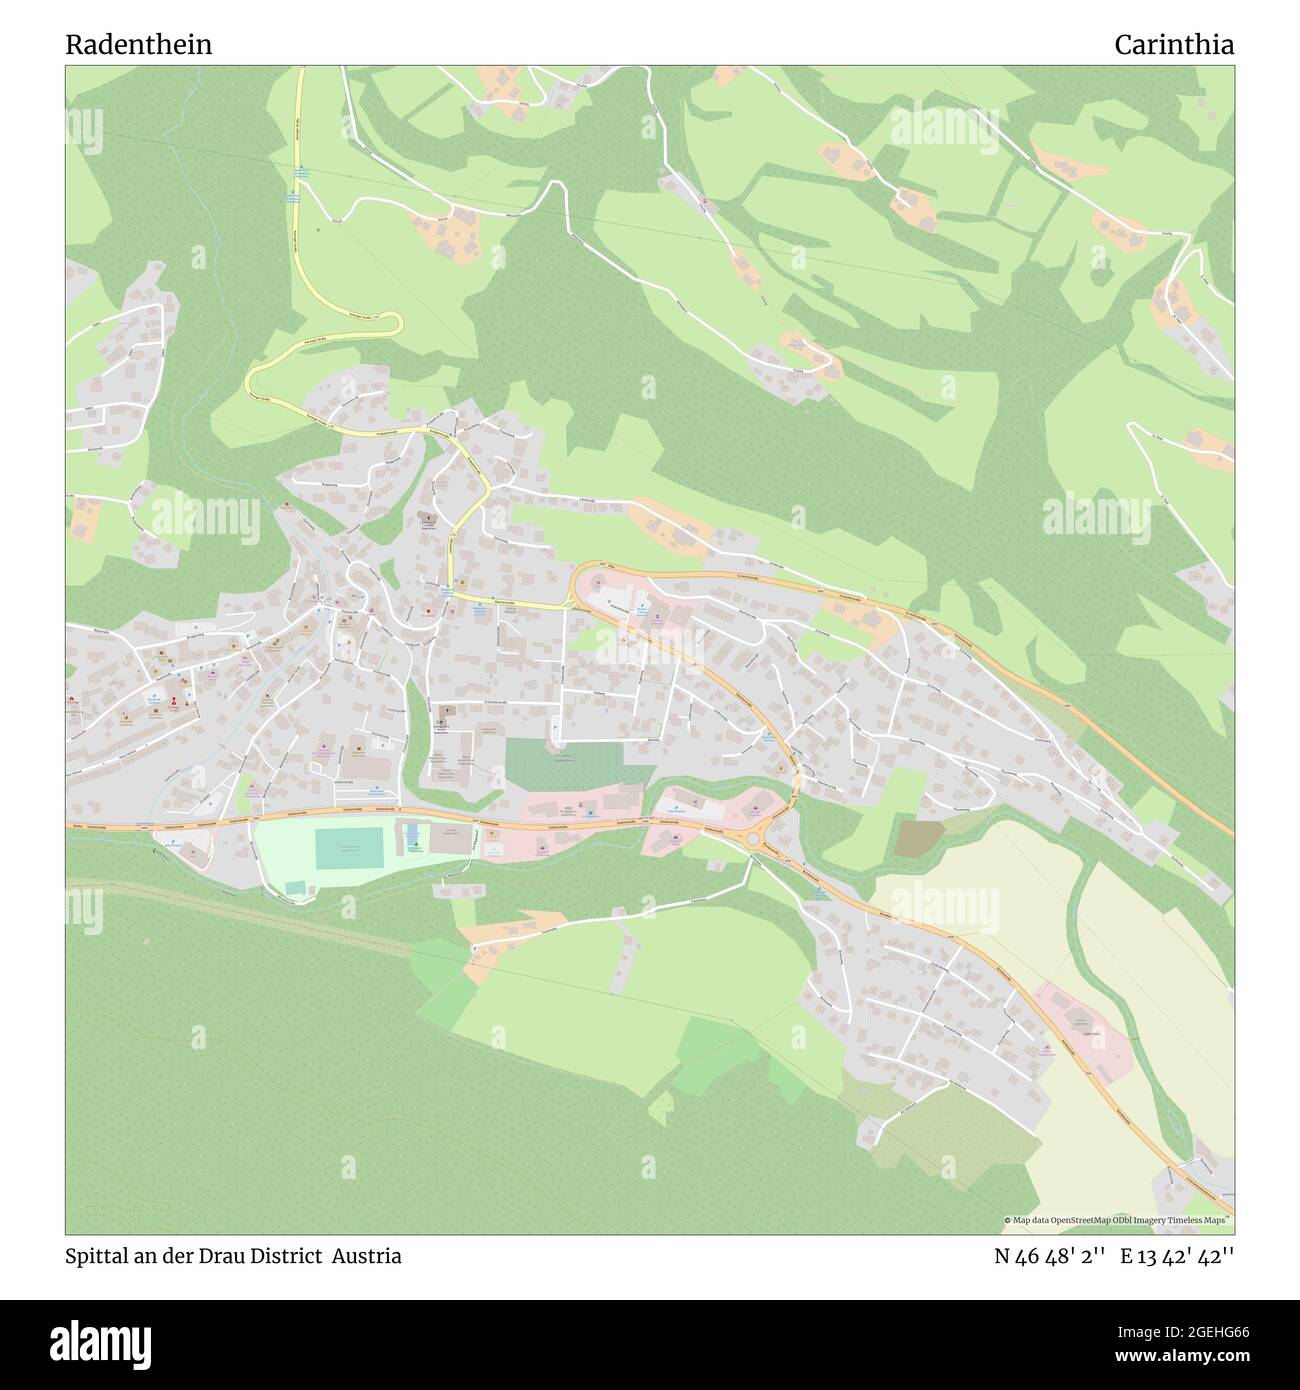 Radenthein, Spittal an der Drau District, Austria, Carinthia, N 46 48' 2'', E 13 42' 42'', map, Timeless Map published in 2021. Travelers, explorers and adventurers like Florence Nightingale, David Livingstone, Ernest Shackleton, Lewis and Clark and Sherlock Holmes relied on maps to plan travels to the world's most remote corners, Timeless Maps is mapping most locations on the globe, showing the achievement of great dreams Stock Photo